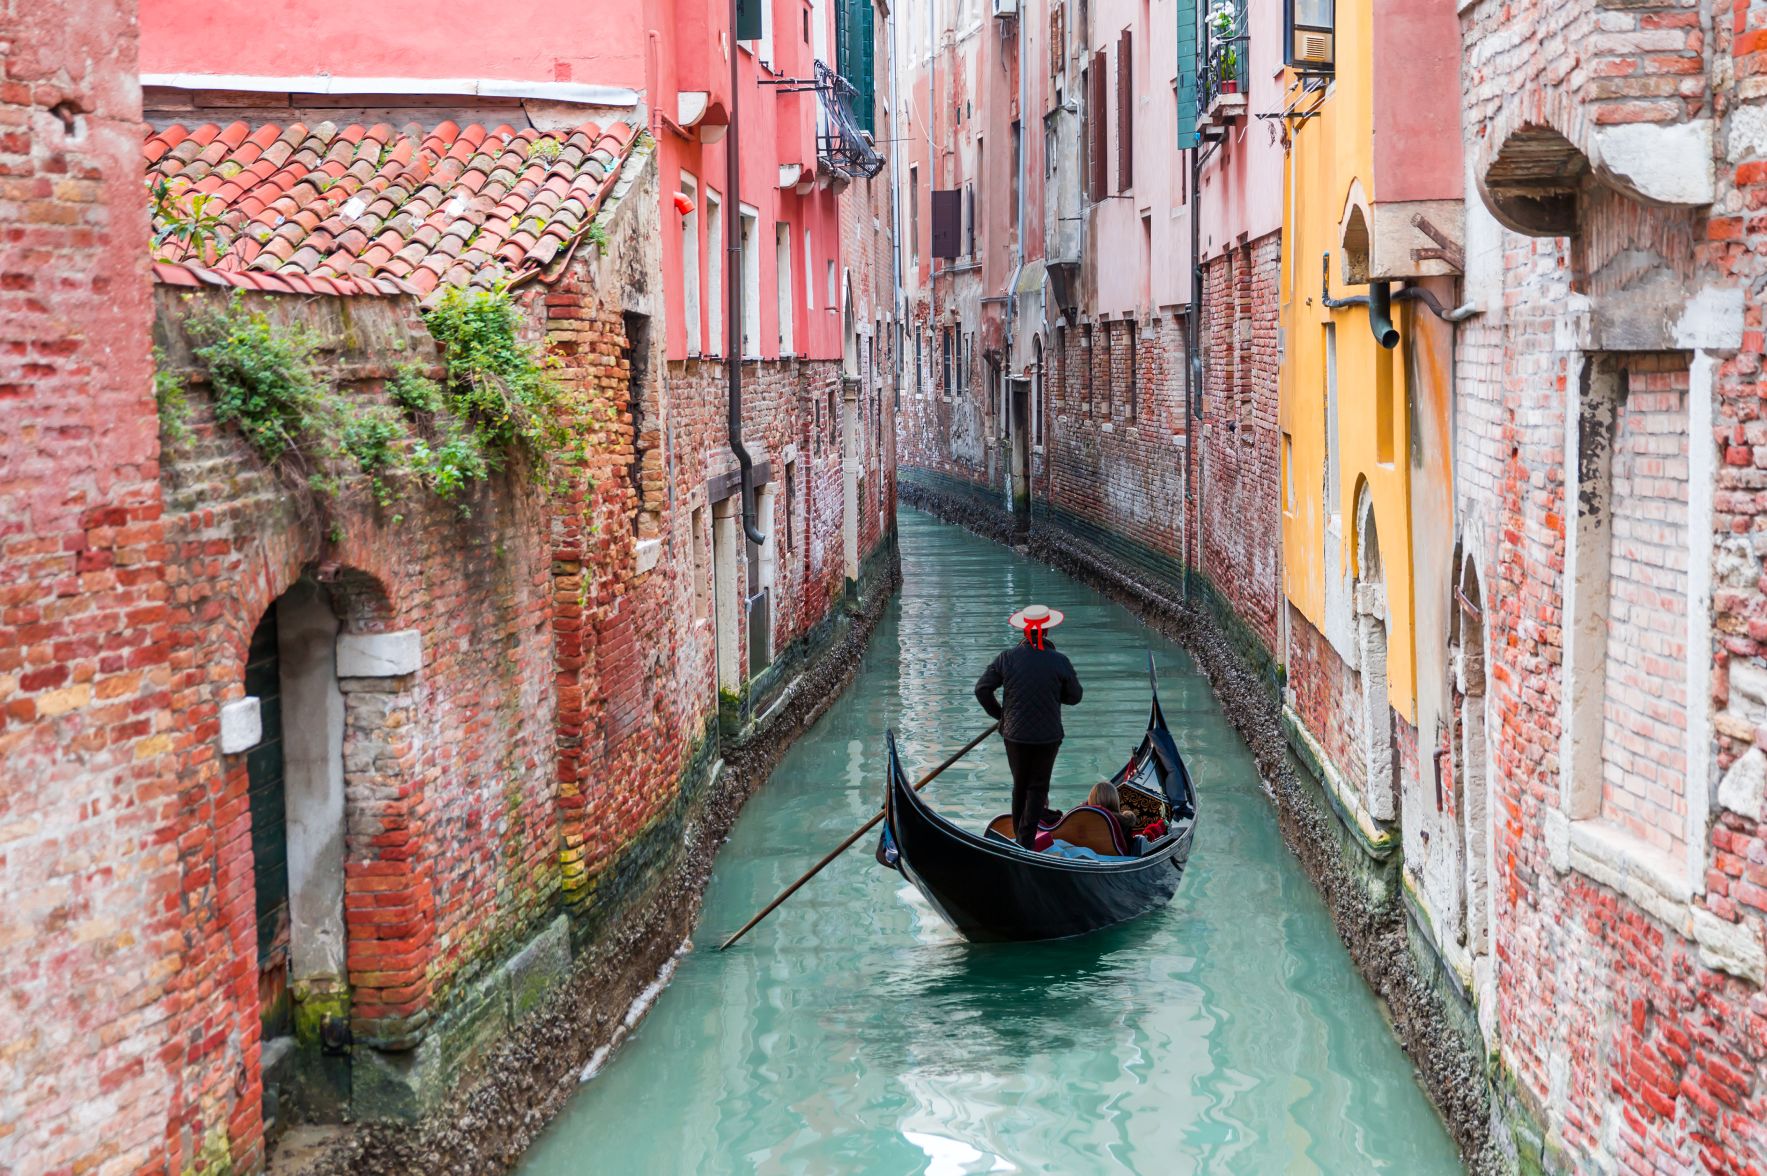 gondola ride on a canal in venice italy 